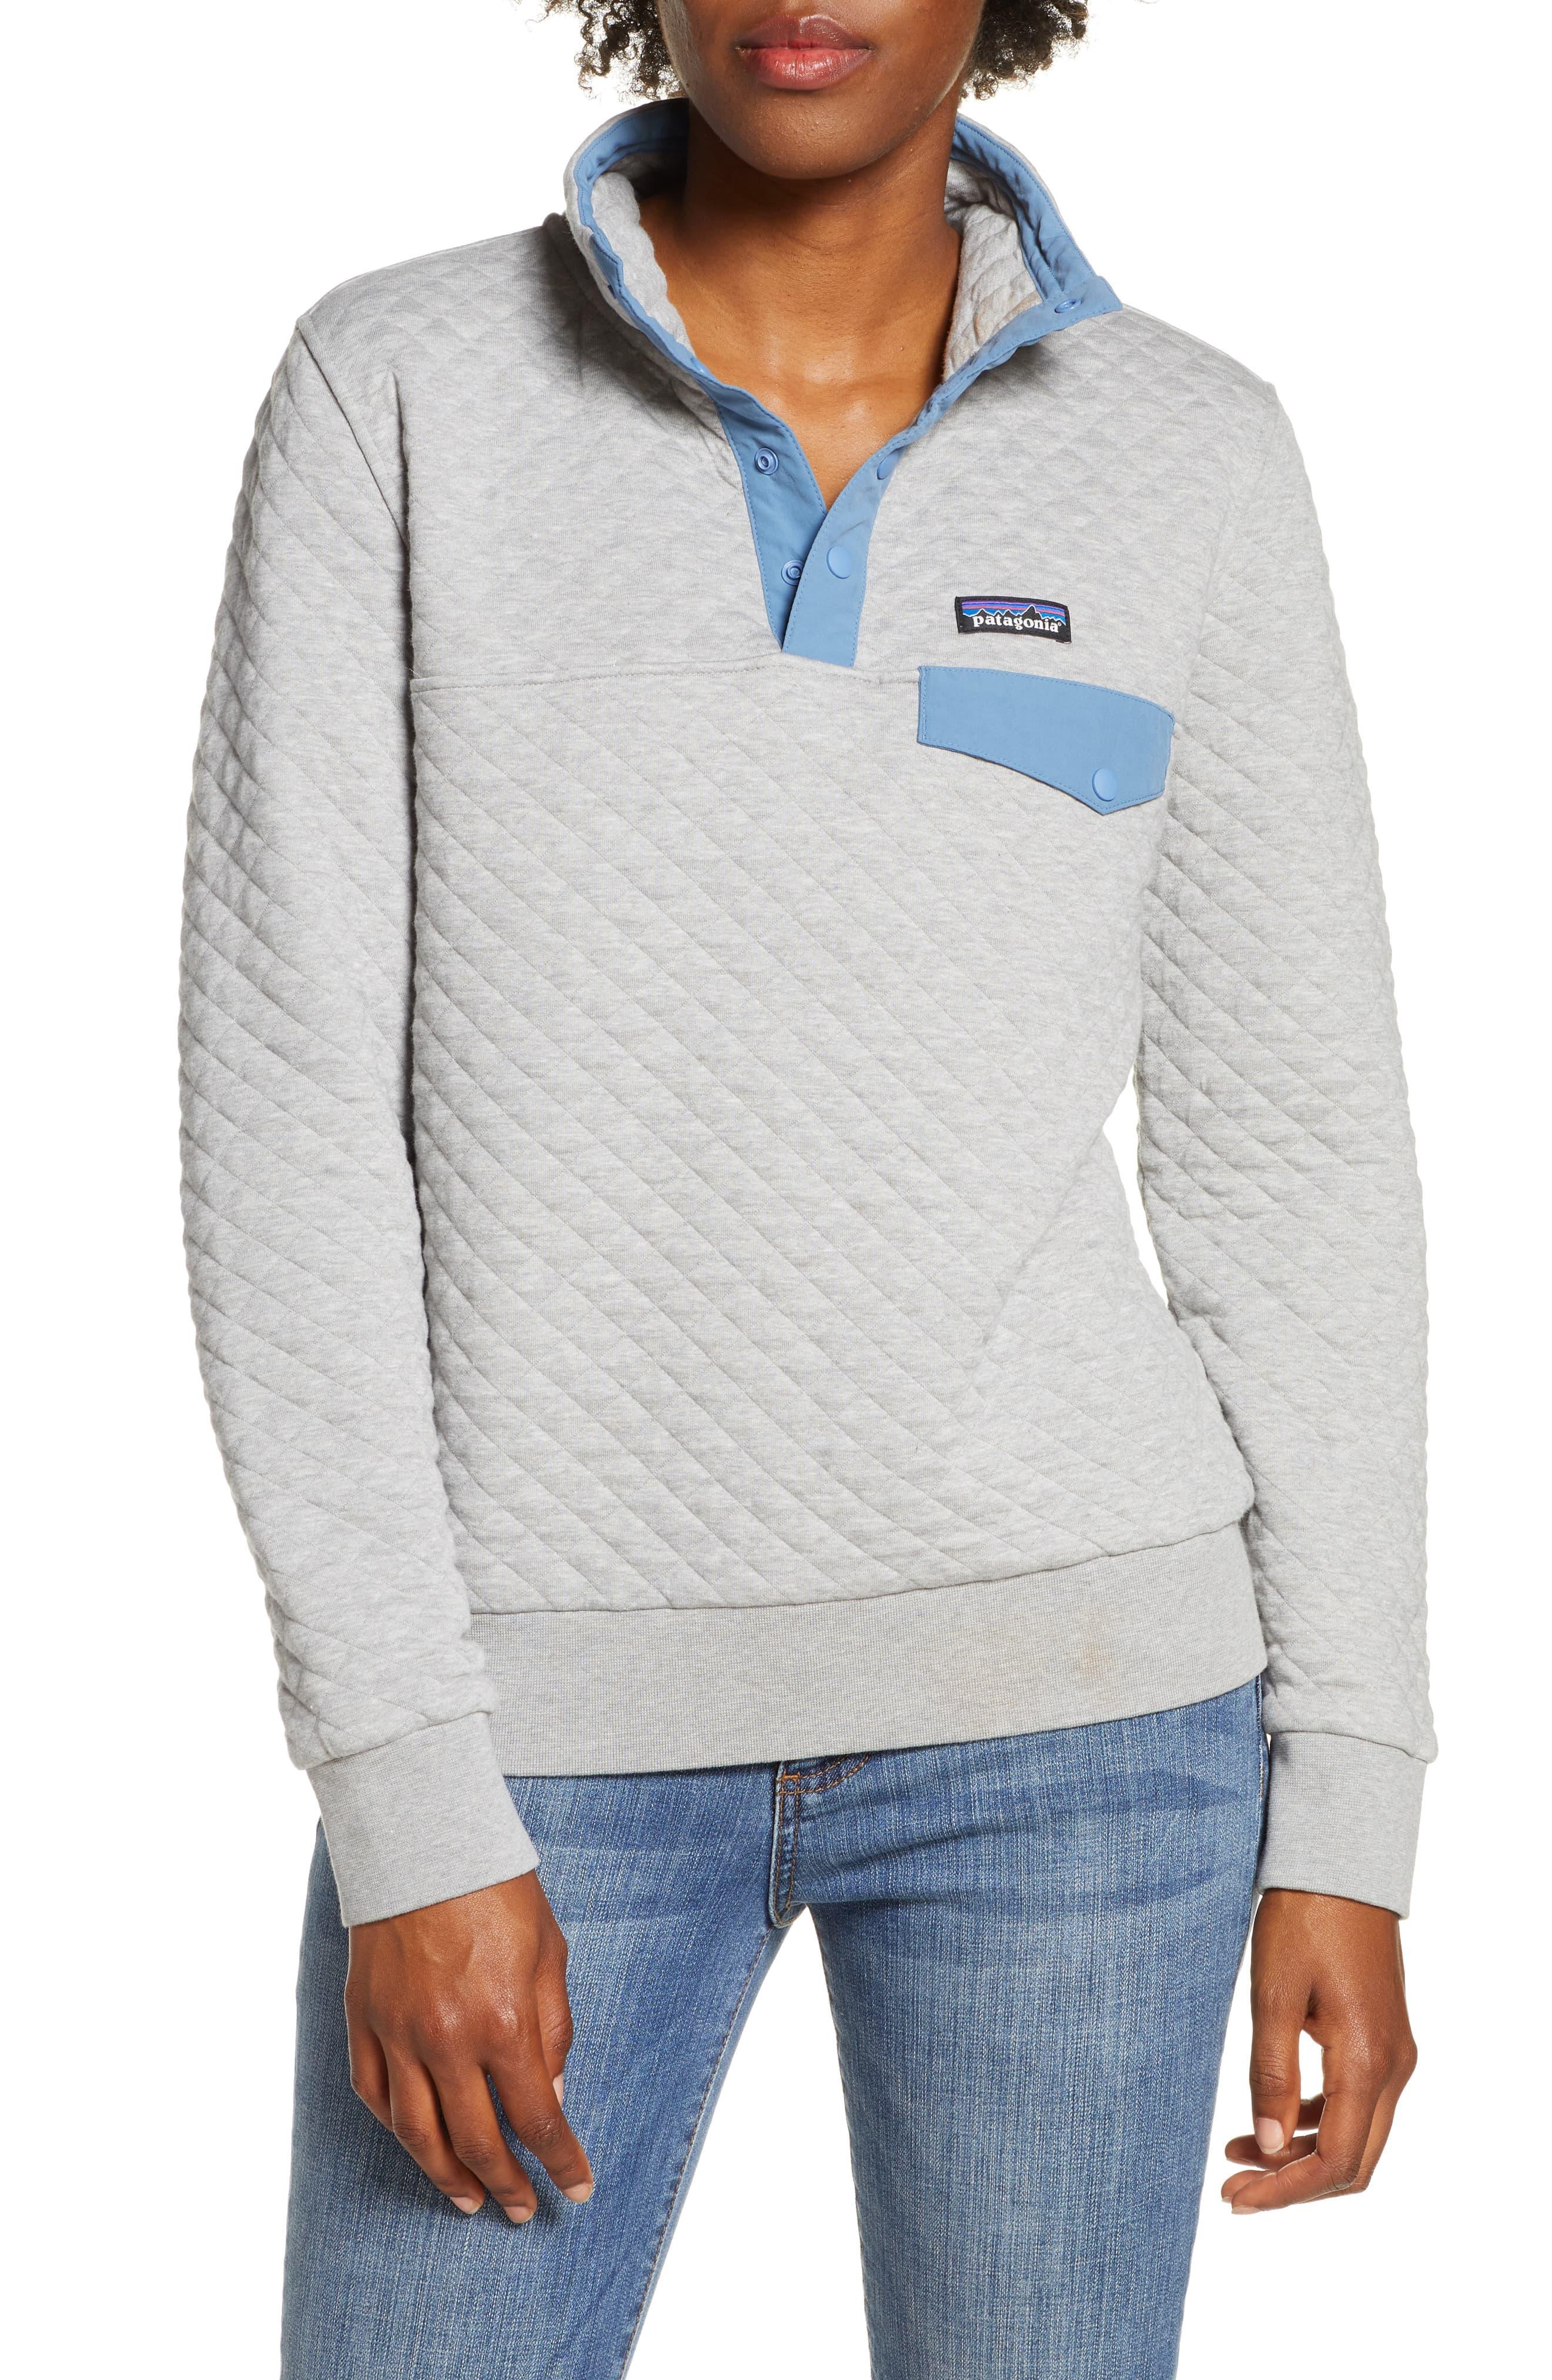 Patagonia Fleece Snap-t Quilted Pullover in Gray - Lyst